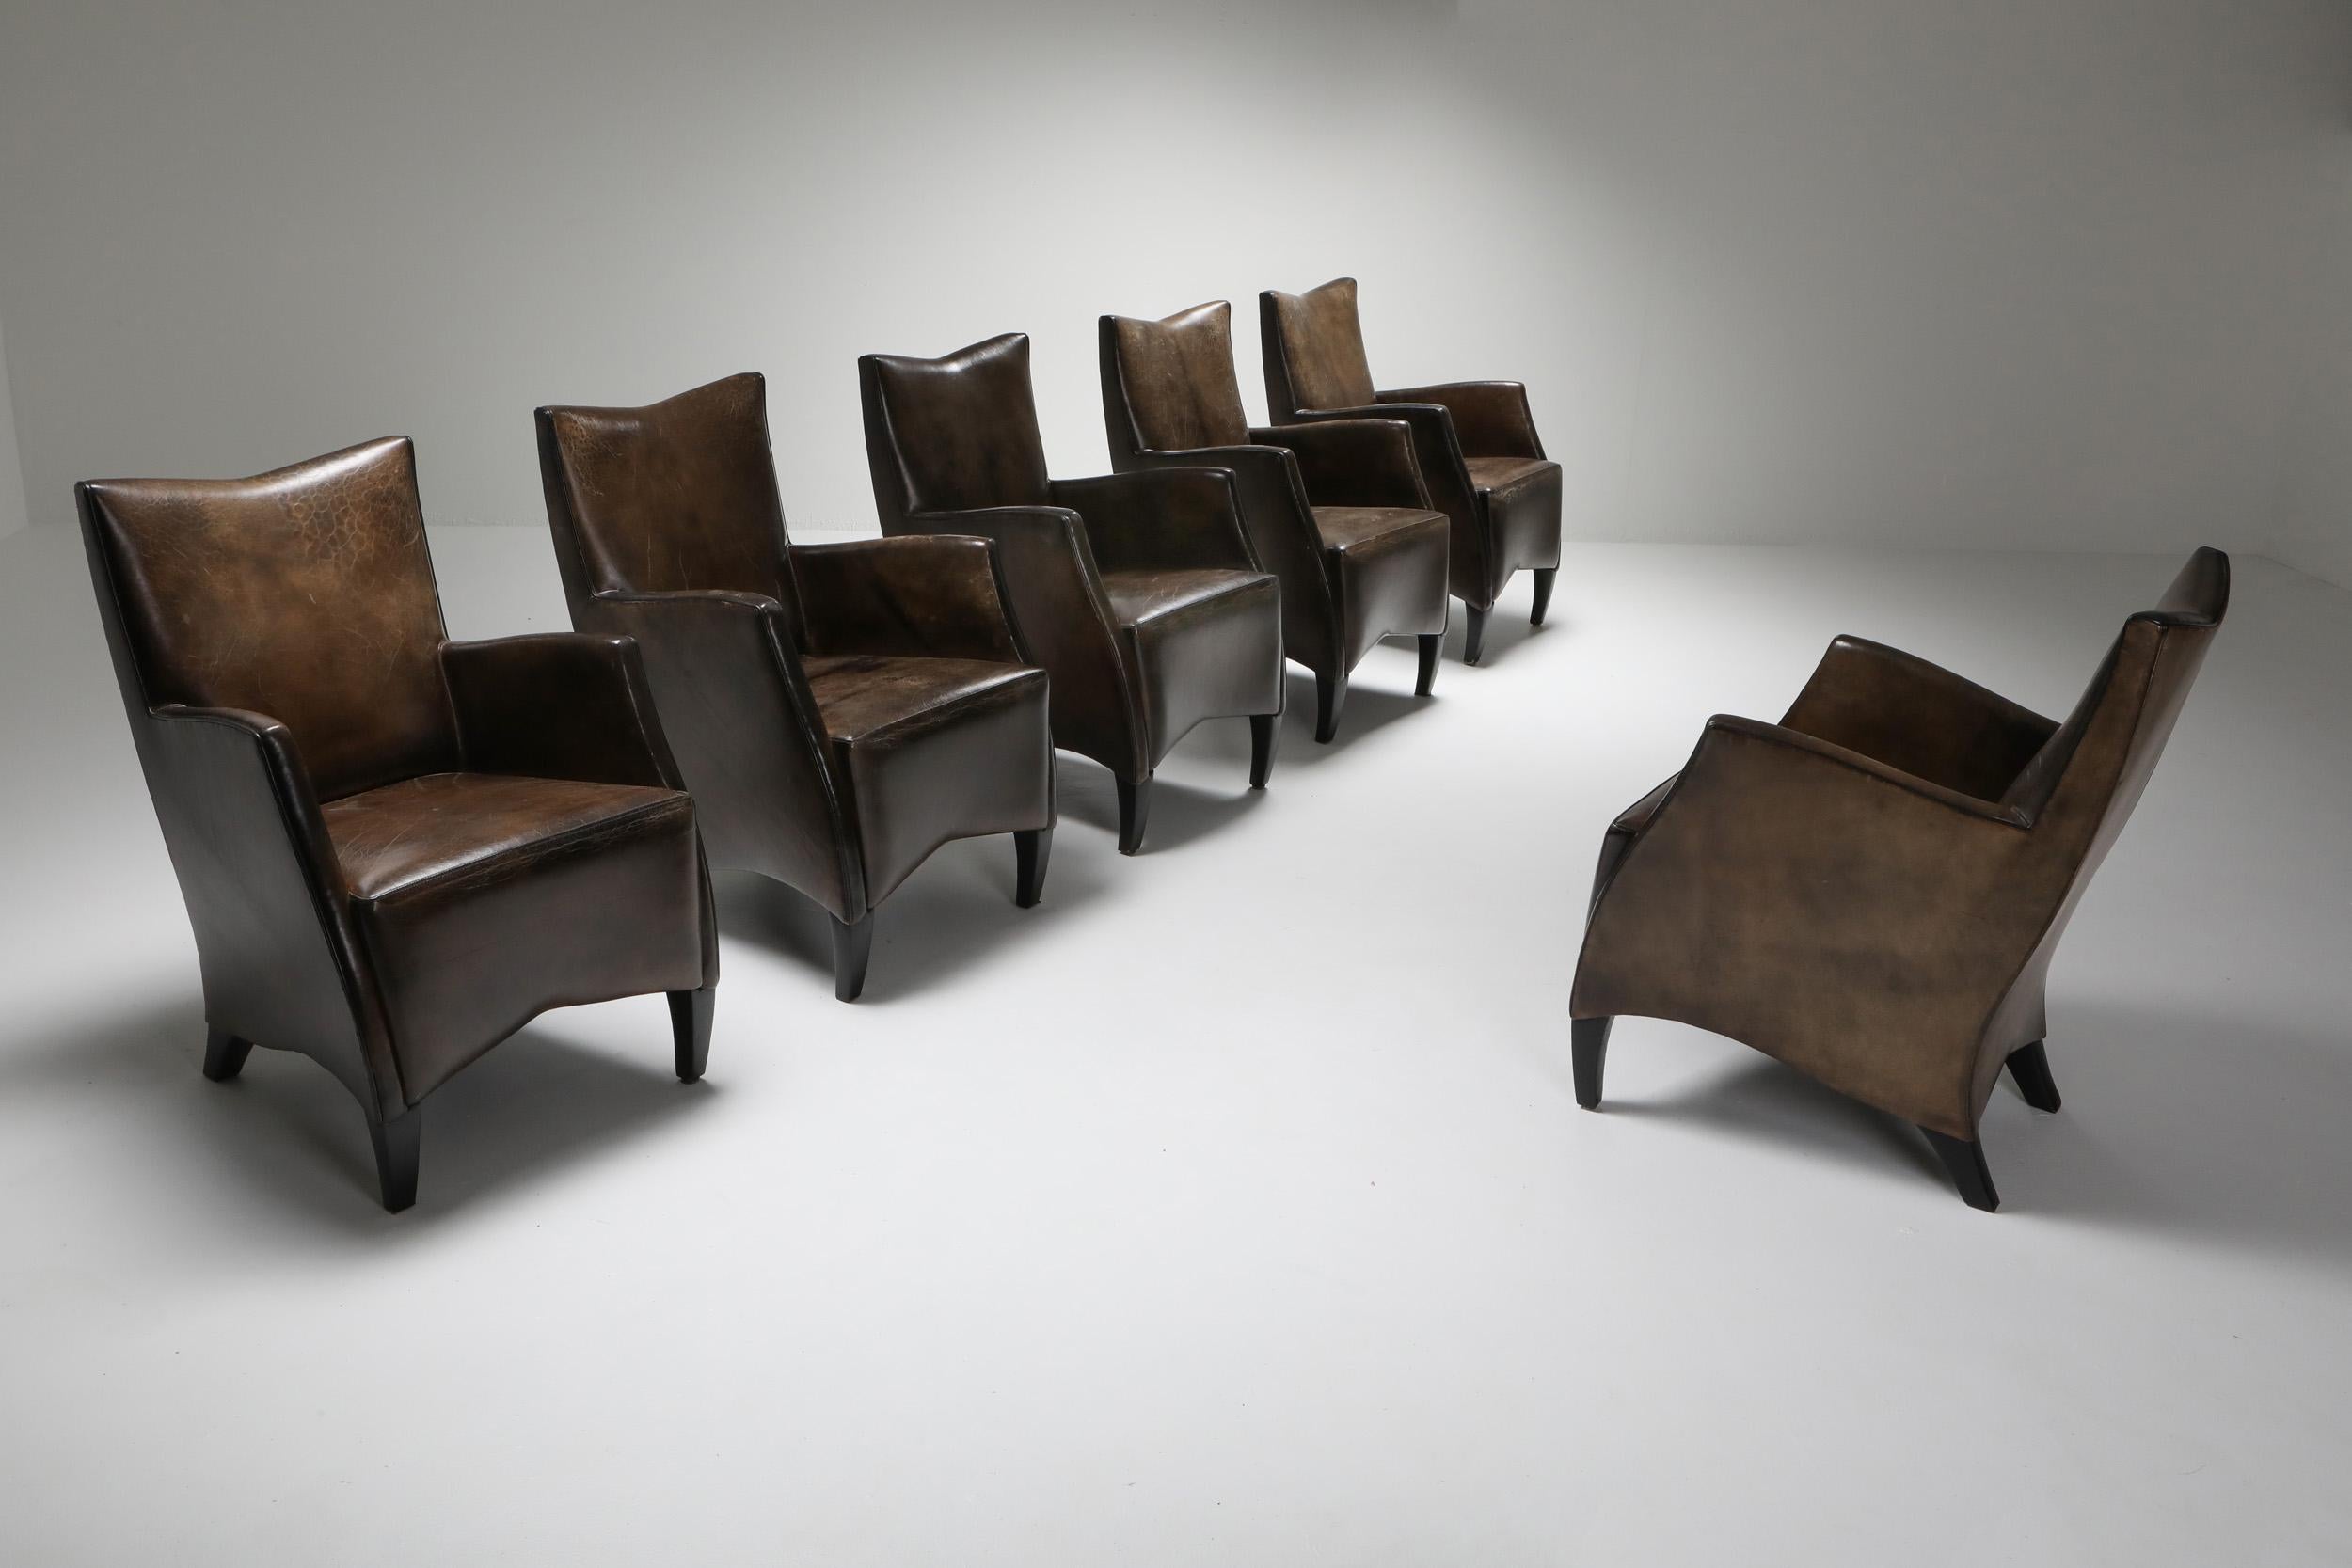 Art Deco inspired leather armchairs by Bart Van Bekhoven, The Netherlands 1970s

In a style which is more contemporary and organic than Classic Art Deco, 
and an unmatched quality as even the legs are covered in leather. 
A true master in